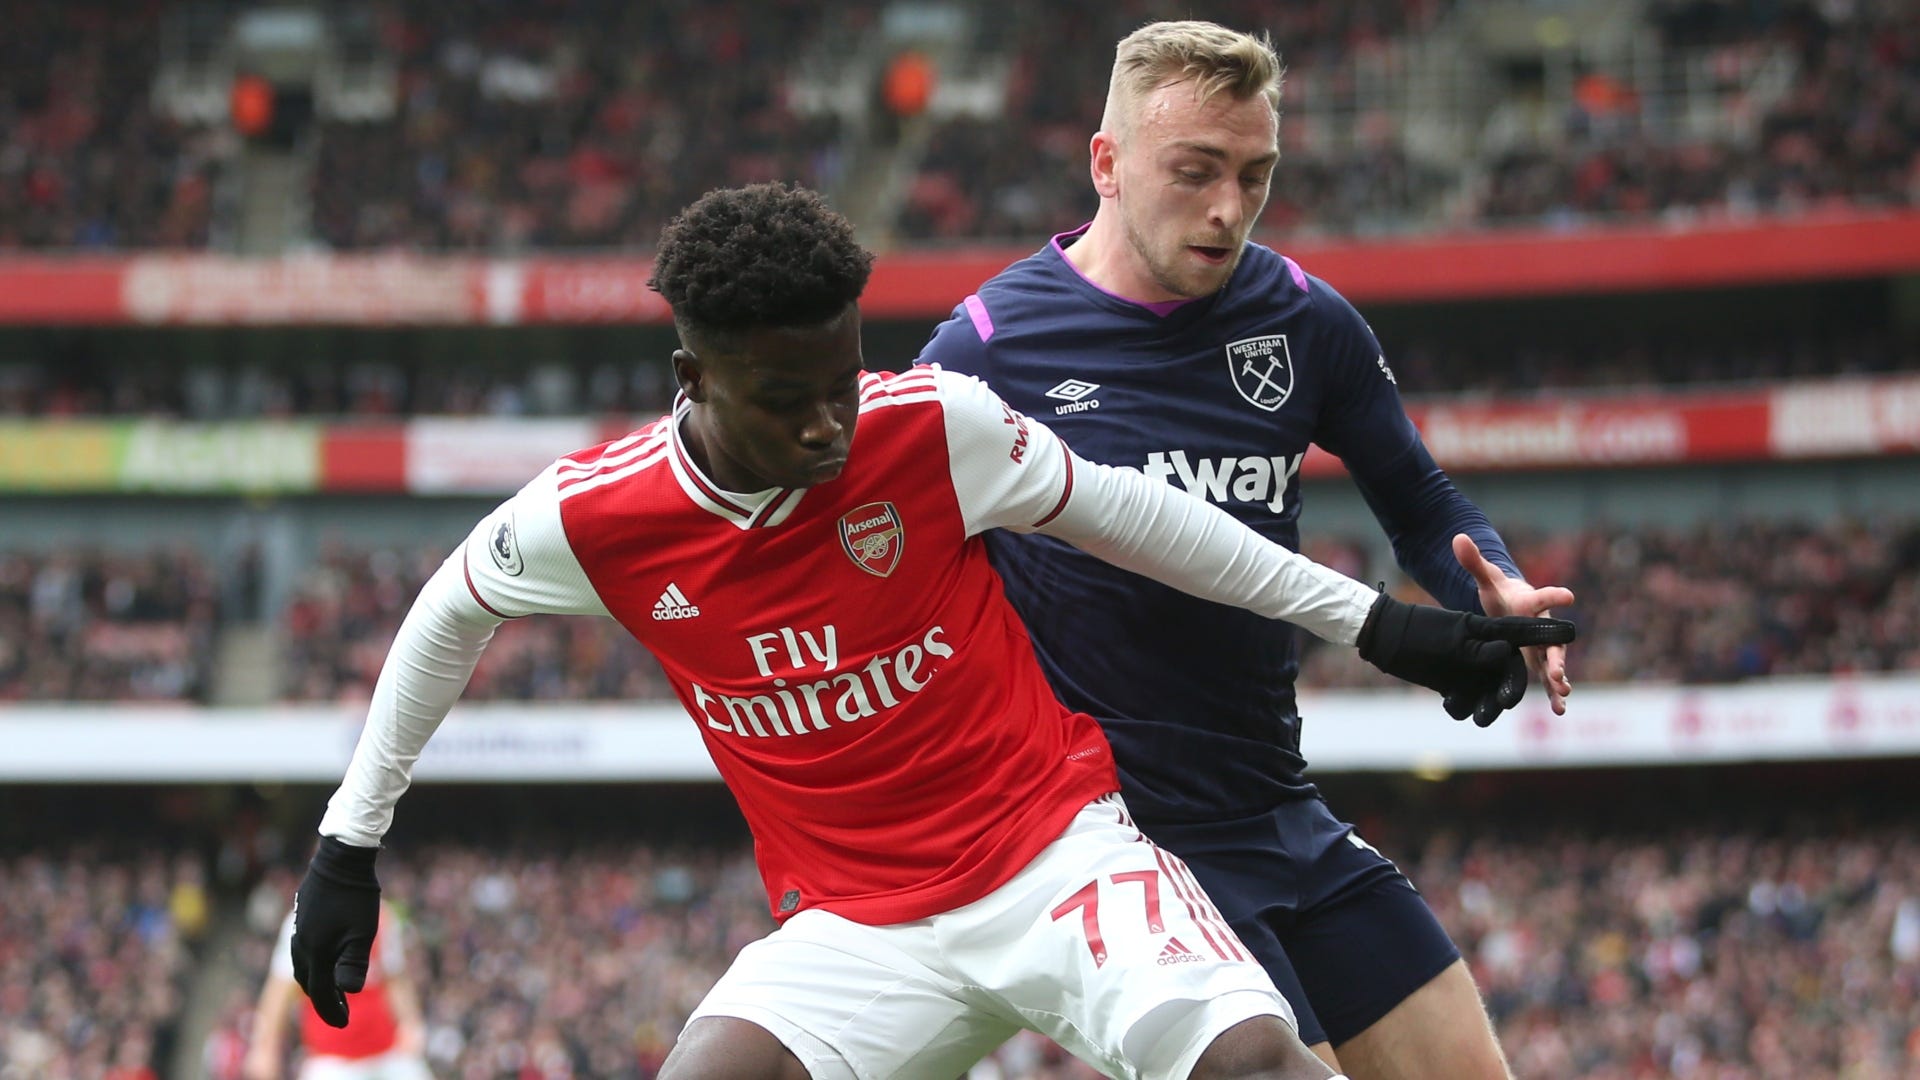 West Ham United vs Arsenal BetKing Tips: Latest odds, team news, preview, predictions | Goal.com US